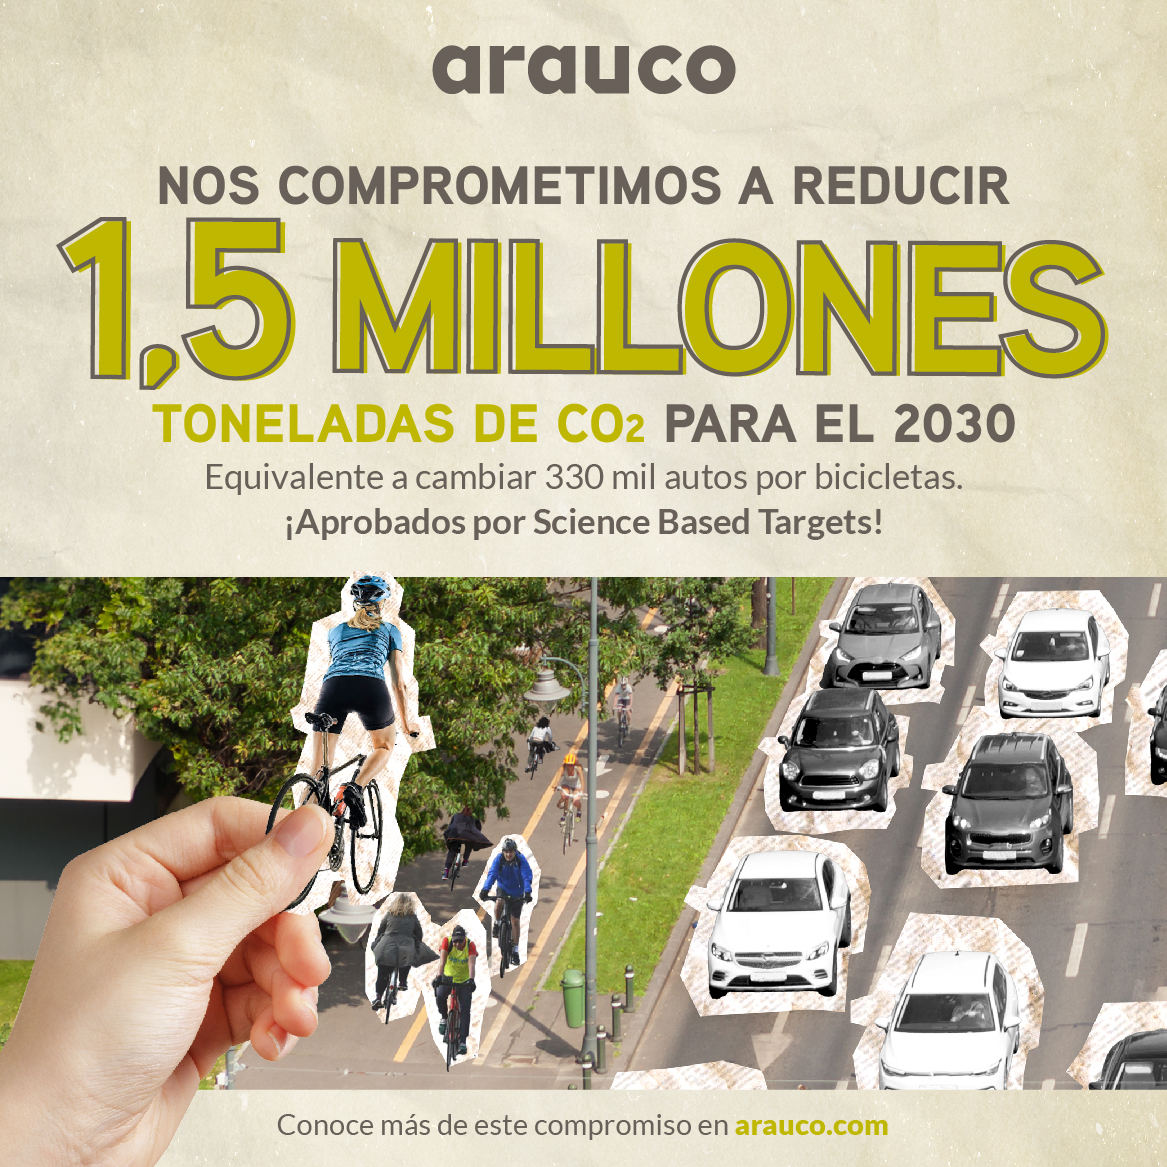 ARAUCO receives approval of Science Based Targets and commits to reducing its emissions by more than 1.5 million tons by 2030.